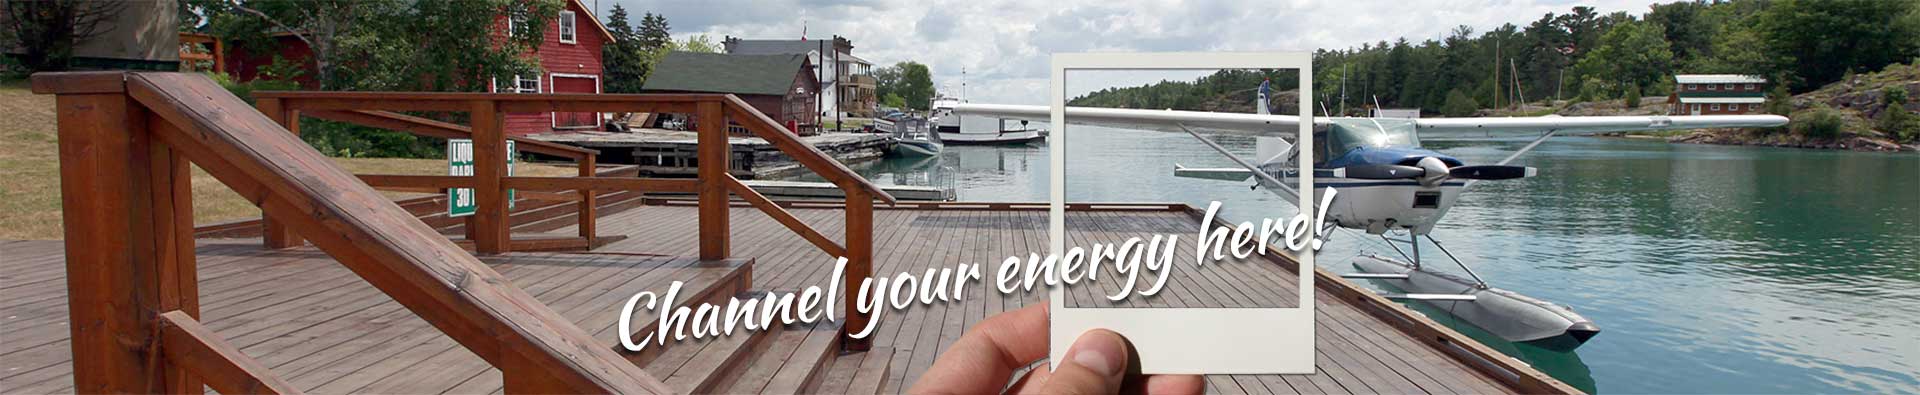 Header image of Killarney's water front with a poloroid photo frame superimposed and a slogan 'Channel your energy here.' over it.